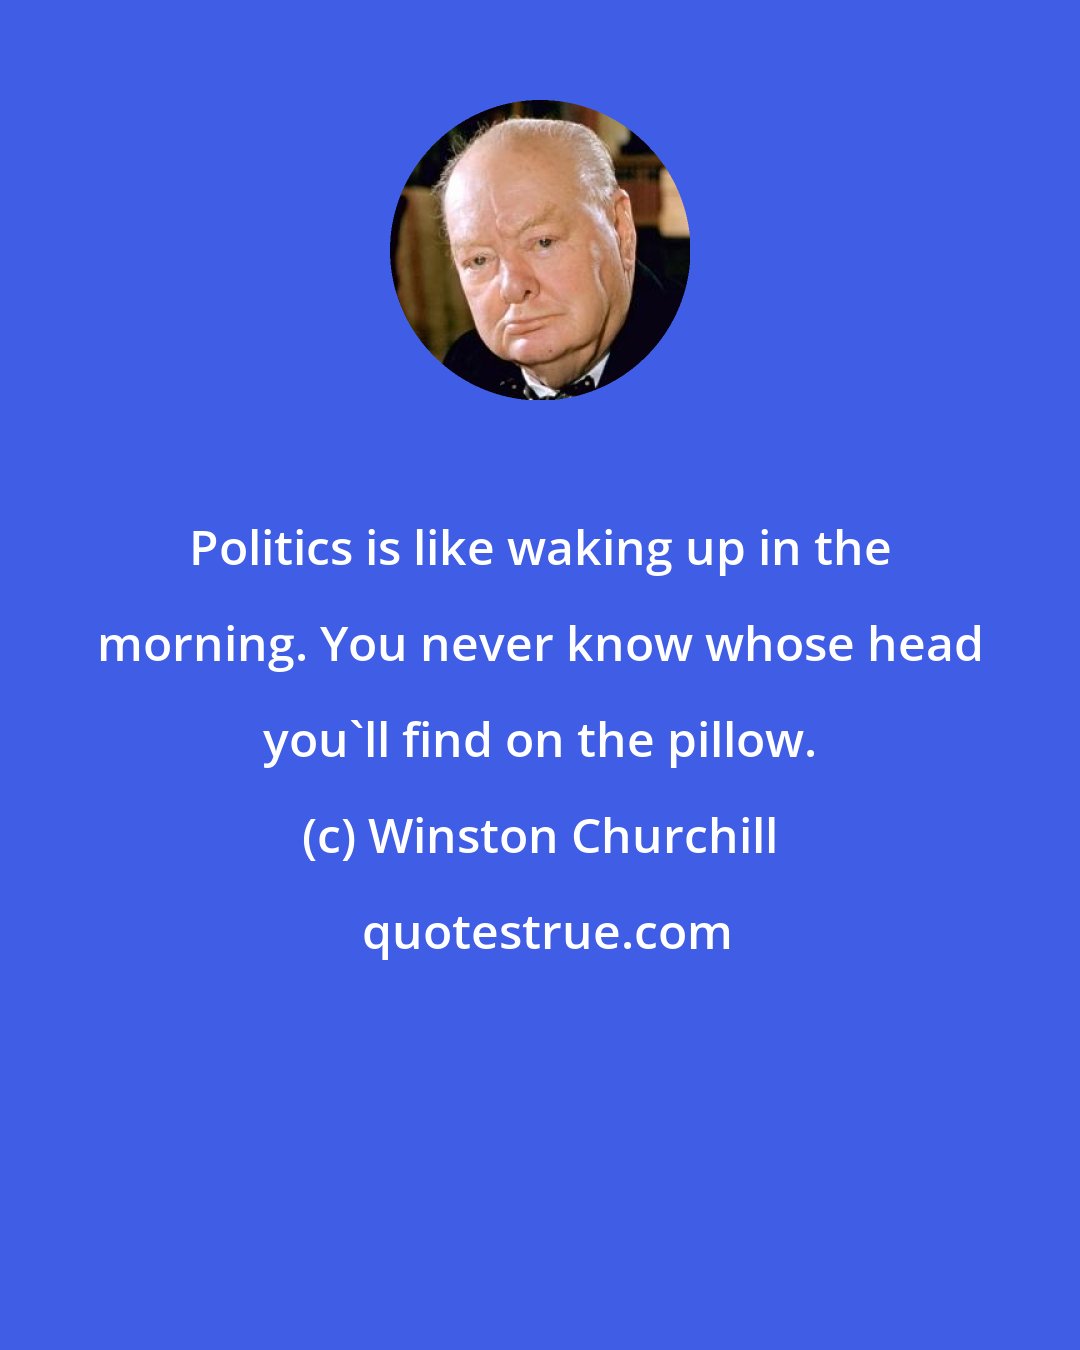 Winston Churchill: Politics is like waking up in the morning. You never know whose head you'll find on the pillow.